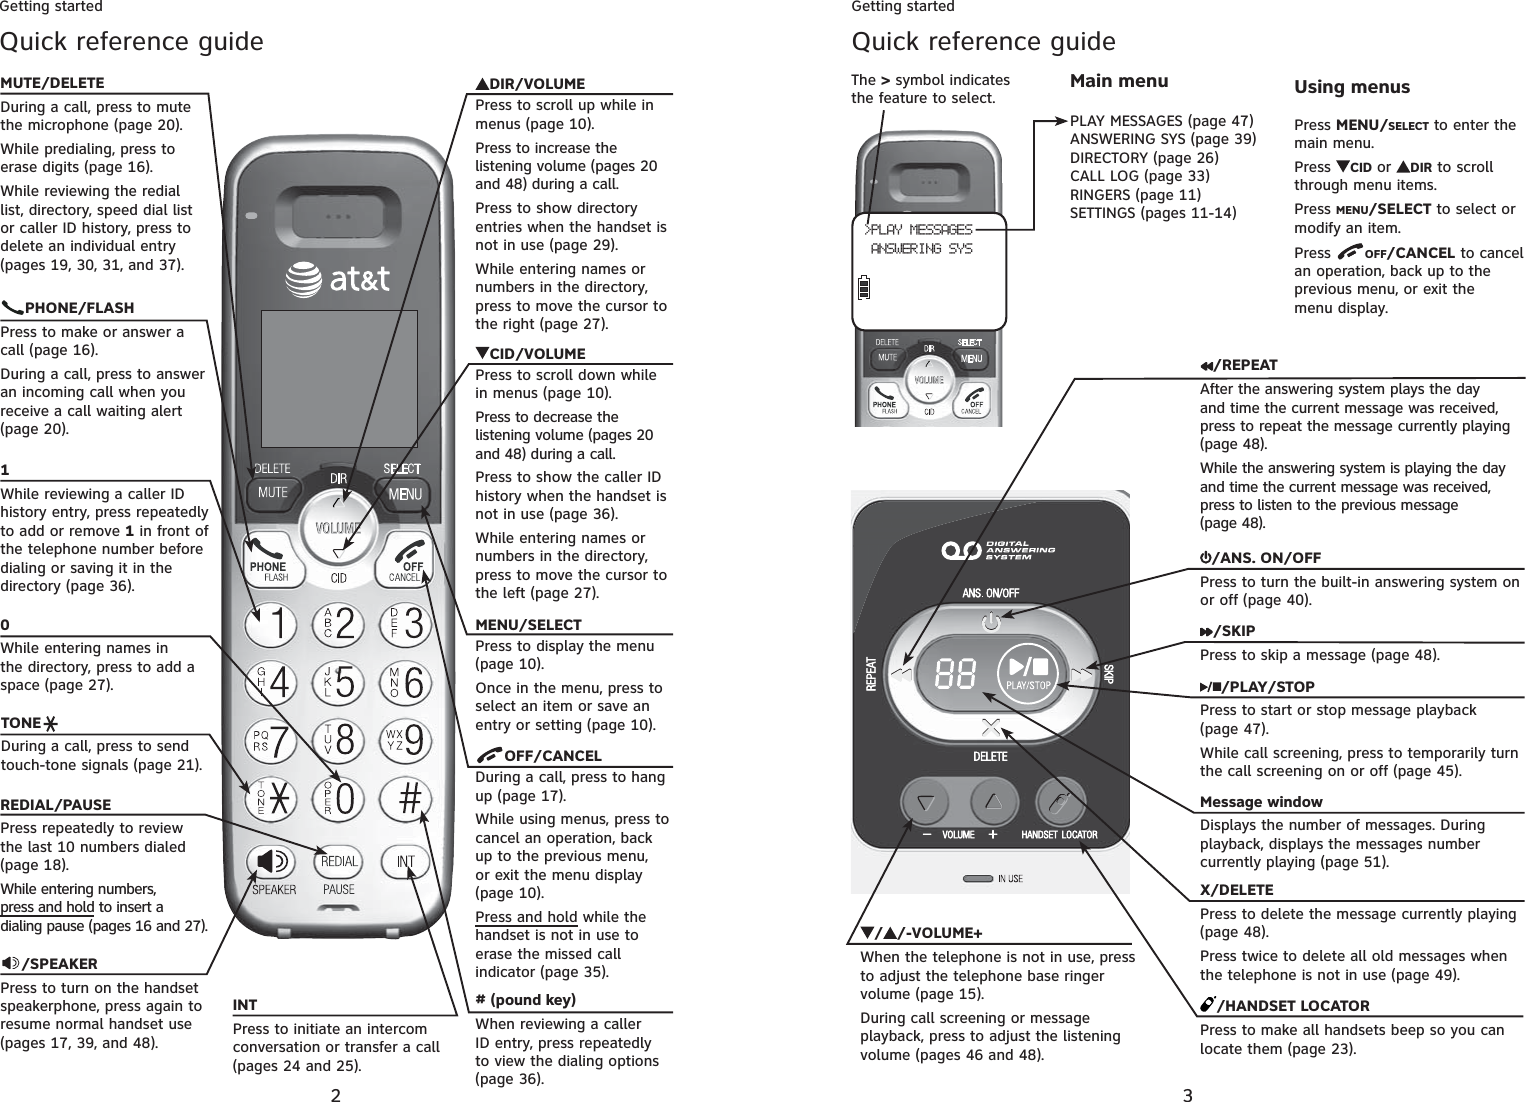 2Quick reference guideGetting startedREDIAL/PAUSEPress repeatedly to review the last 10 numbers dialed (page 18).While entering numbers, press and hold to insert a dialing pause (pages 16 and 27).PHONE/FLASHPress to make or answer a call (page 16).During a call, press to answer an incoming call when you receive a call waiting alert (page 20).1While reviewing a caller ID history entry, press repeatedly to add or remove 1 in front of the telephone number before dialing or saving it in the directory (page 36).0While entering names in the directory, press to add a space (page 27).MUTE/DELETEDuring a call, press to mute the microphone (page 20).While predialing, press to erase digits (page 16).While reviewing the redial list, directory, speed dial list or caller ID history, press to delete an individual entry (pages 19, 30, 31, and 37).TONEDuring a call, press to send touch-tone signals (page 21)./SPEAKERPress to turn on the handset speakerphone, press again to resume normal handset use (pages 17, 39, and 48).DIR/VOLUMEPress to scroll up while in menus (page 10).Press to increase the listening volume (pages 20and 48) during a call.Press to show directory entries when the handset is not in use (page 29).While entering names or numbers in the directory, press to move the cursor to the right (page 27).CID/VOLUMEPress to scroll down while in menus (page 10).Press to decrease the listening volume (pages 20and 48) during a call.Press to show the caller ID history when the handset is not in use (page 36).While entering names or numbers in the directory, press to move the cursor to the left (page 27).MENU/SELECTPress to display the menu (page 10).Once in the menu, press to select an item or save an entry or setting (page 10).OFF/CANCELDuring a call, press to hang up (page 17).While using menus, press to cancel an operation, back up to the previous menu, or exit the menu display (page 10).Press and hold while the handset is not in use to erase the missed call indicator (page 35).# (pound key)When reviewing a caller ID entry, press repeatedly to view the dialing options (page 36).INTPress to initiate an intercom conversation or transfer a call (pages 24 and 25).Getting started3Quick reference guideUsing menusPress MENU/SELECT to enter the main menu.Press  CID or DIR to scroll through menu items.Press MENU/SELECT to select or modify an item.Press  OFF/CANCEL to cancel an operation, back up to the previous menu, or exit the menu display.&gt;PLAY MESSAGES ANSWERING SYSThe &gt; symbol indicates the feature to select.PLAY MESSAGES (page 47)ANSWERING SYS (page 39)DIRECTORY (page 26)CALL LOG (page 33)RINGERS (page 11)SETTINGS (pages 11-14)Main menu/SKIPPress to skip a message (page 48)./ANS. ON/OFFPress to turn the built-in answering system on or off (page 40).Message windowDisplays the number of messages. During playback, displays the messages number currently playing (page 51)./PLAY/STOPPress to start or stop message playback (page 47).While call screening, press to temporarily turn the call screening on or off (page 45).X/DELETEPress to delete the message currently playing (page 48).Press twice to delete all old messages when the telephone is not in use (page 49)./REPEATAfter the answering system plays the day and time the current message was received, press to repeat the message currently playing (page 48).While the answering system is playing the day and time the current message was received, press to listen to the previous message (page 48)./HANDSET LOCATORPress to make all handsets beep so you can locate them (page 23).//-VOLUME+When the telephone is not in use, press to adjust the telephone base ringer volume (page 15).During call screening or message playback, press to adjust the listening volume (pages 46 and 48).